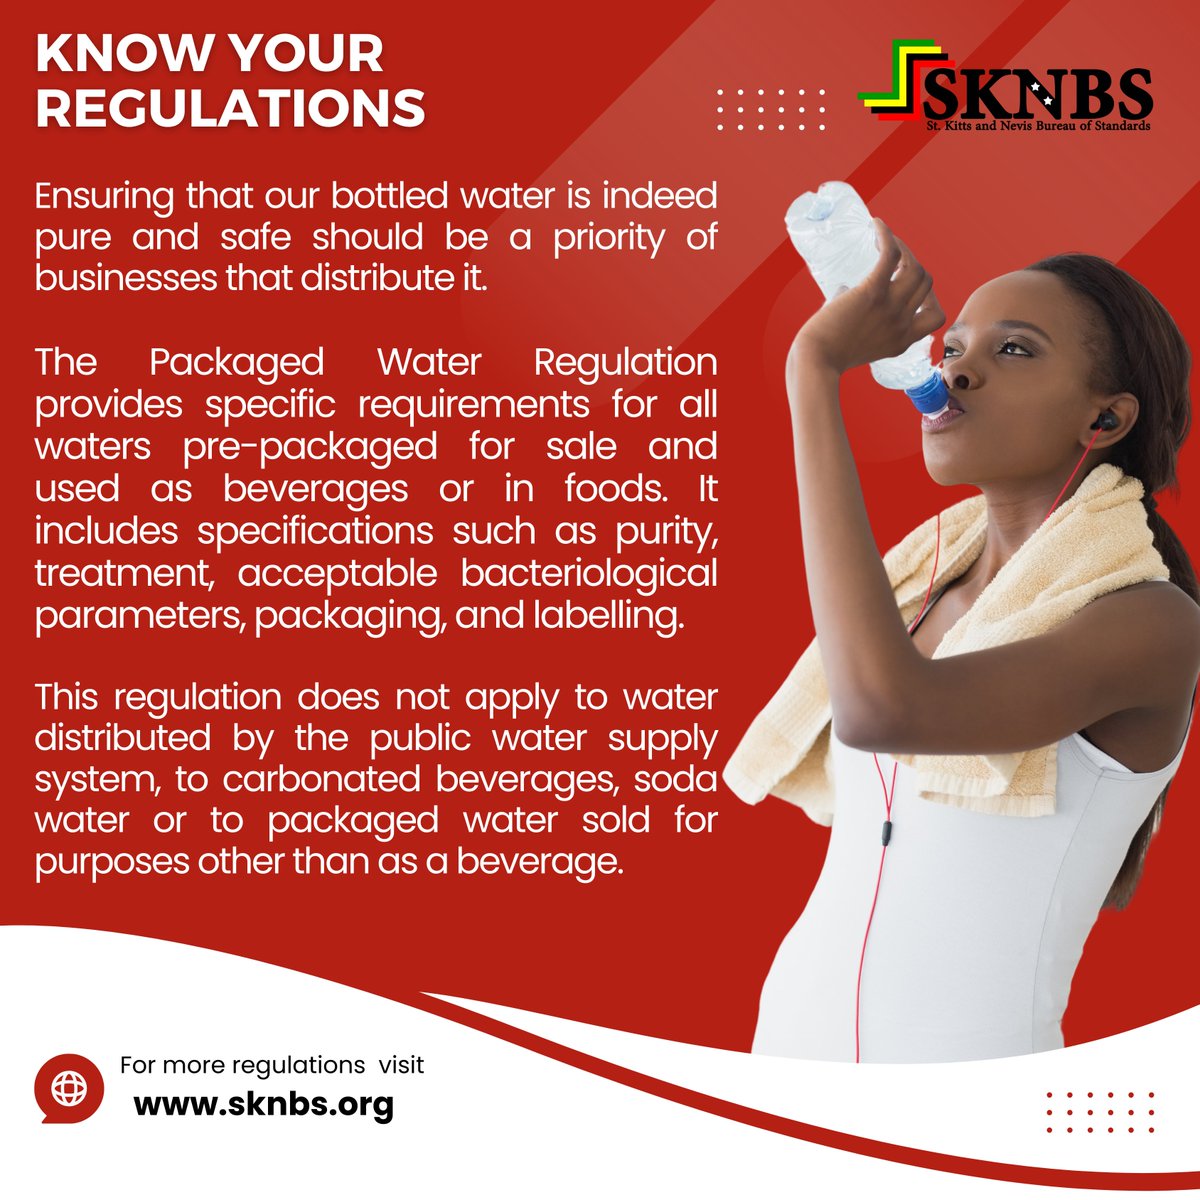 Did you know that St. Kitts and Nevis has a packaged water regulation? 

To find out more, visit sknbs.org/technical-regu…

#Regulations #sknbs #QualityMatters #stkittsandnevis